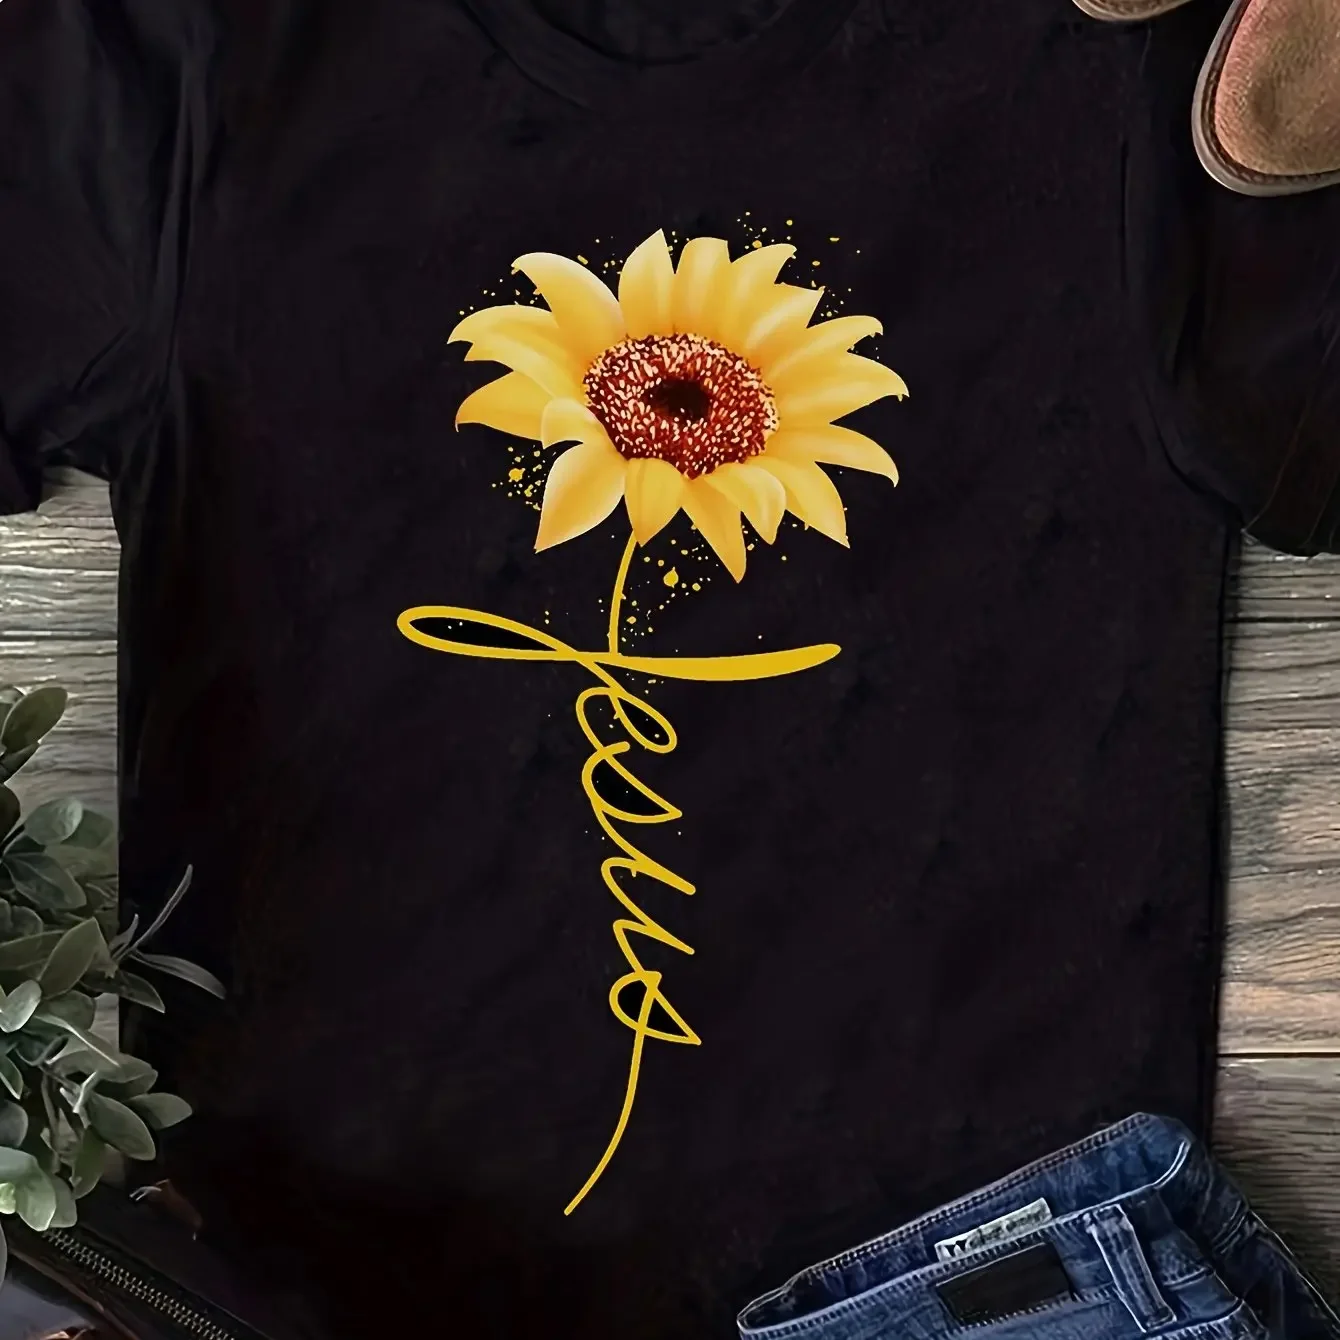 

Vintage Funny T-Shirt Graphic Sunflower Print Crew Neck Tops Casual Short Sleeve Top for Spring & Summer, Women's Clothing Tee